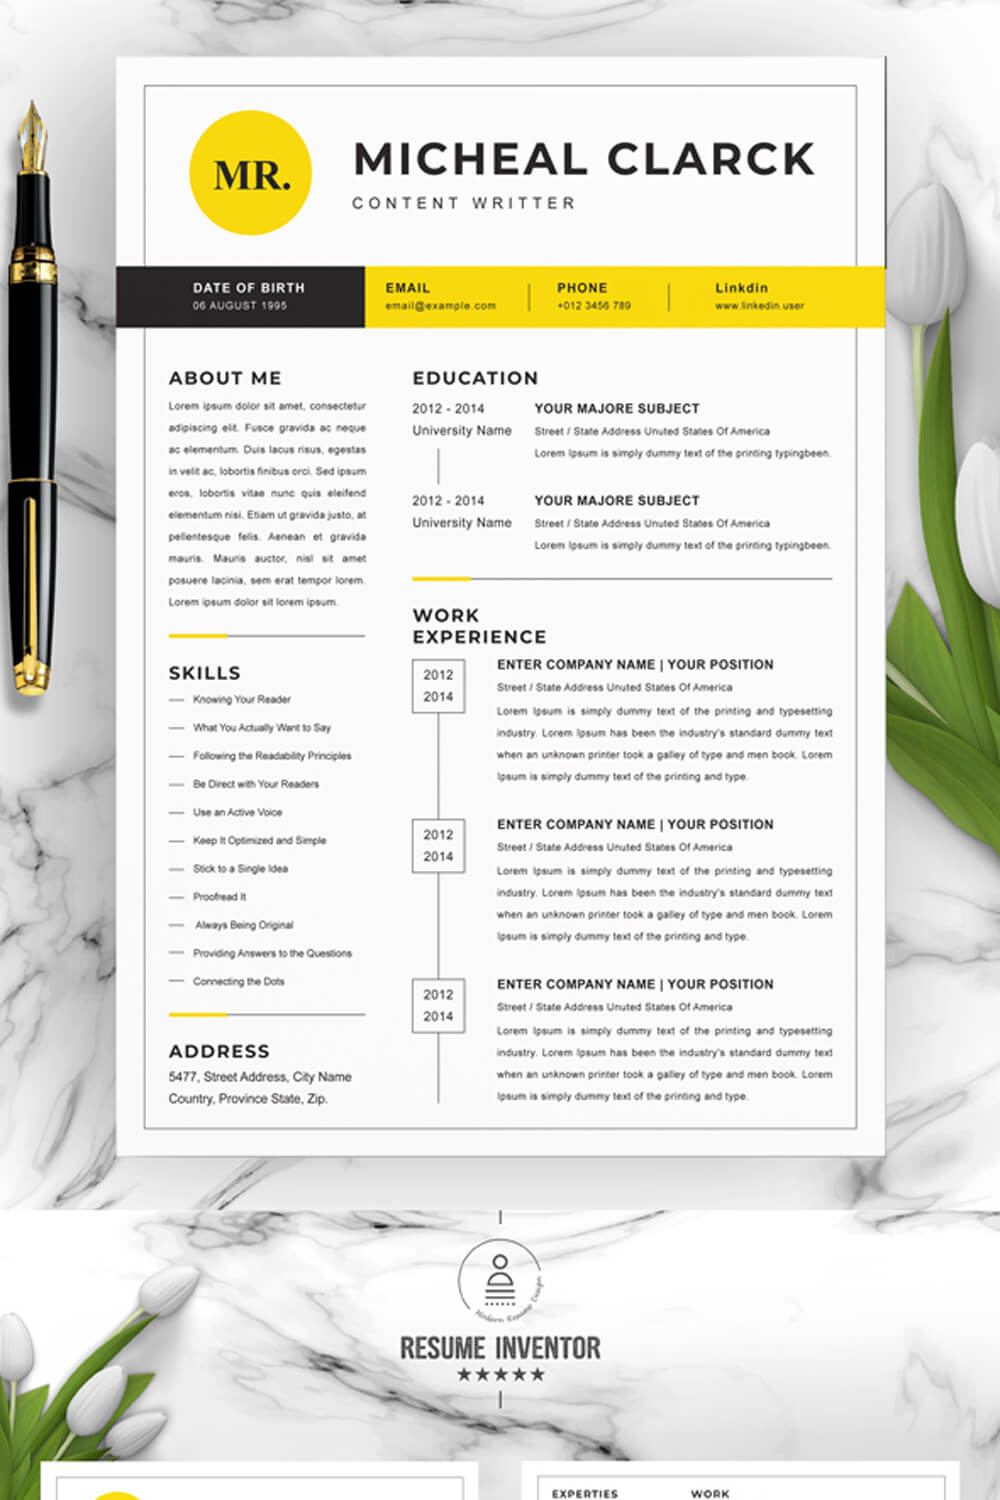 CONTENT WRITER RESUME TEMPLATE | CV TEMPLATE WORD (DOCX) FORMAT pinterest preview image.